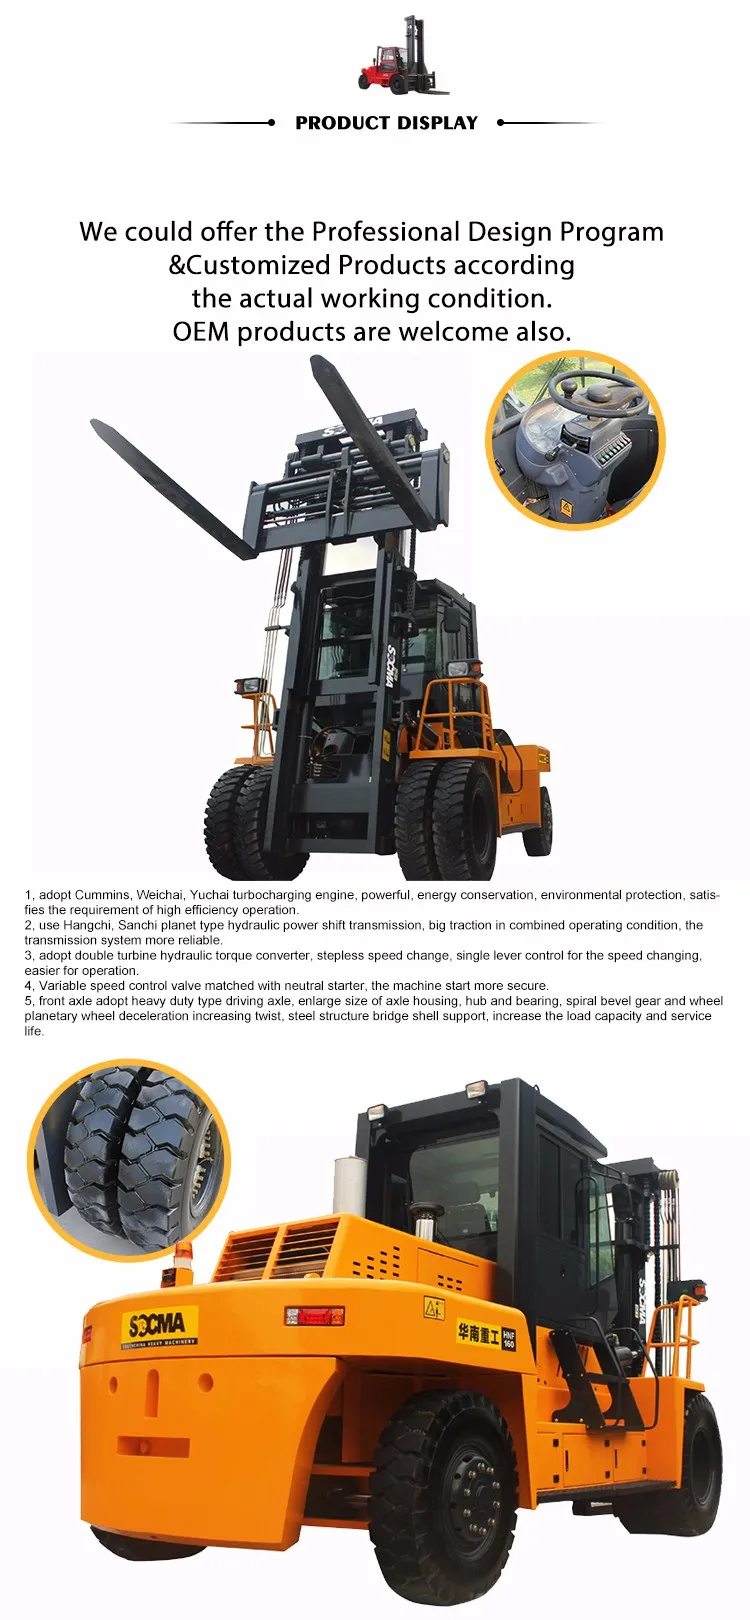 SOCMA Heavy Duty Forklift With Closed Cabin and Heavy Side Shift and Fork Positioner